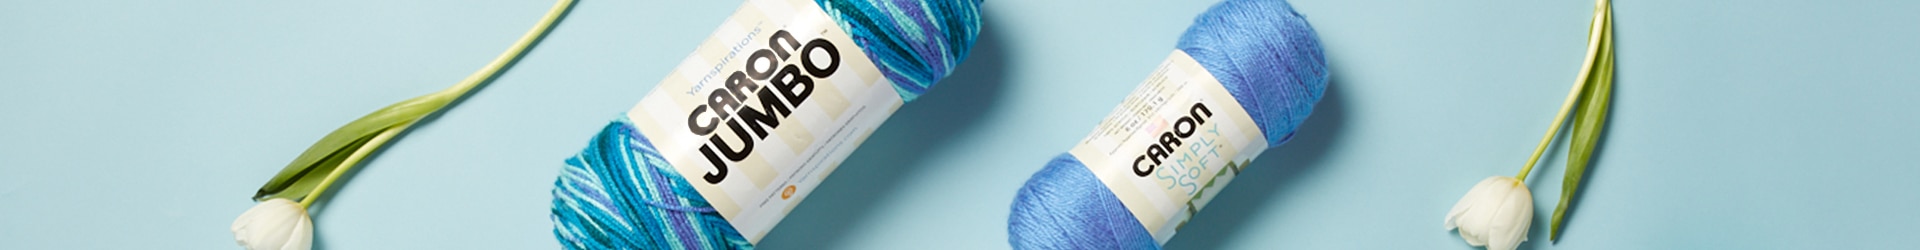 Look for soft & beautiful yarn from Caron for your next knitting or crochet project, as JOANN.